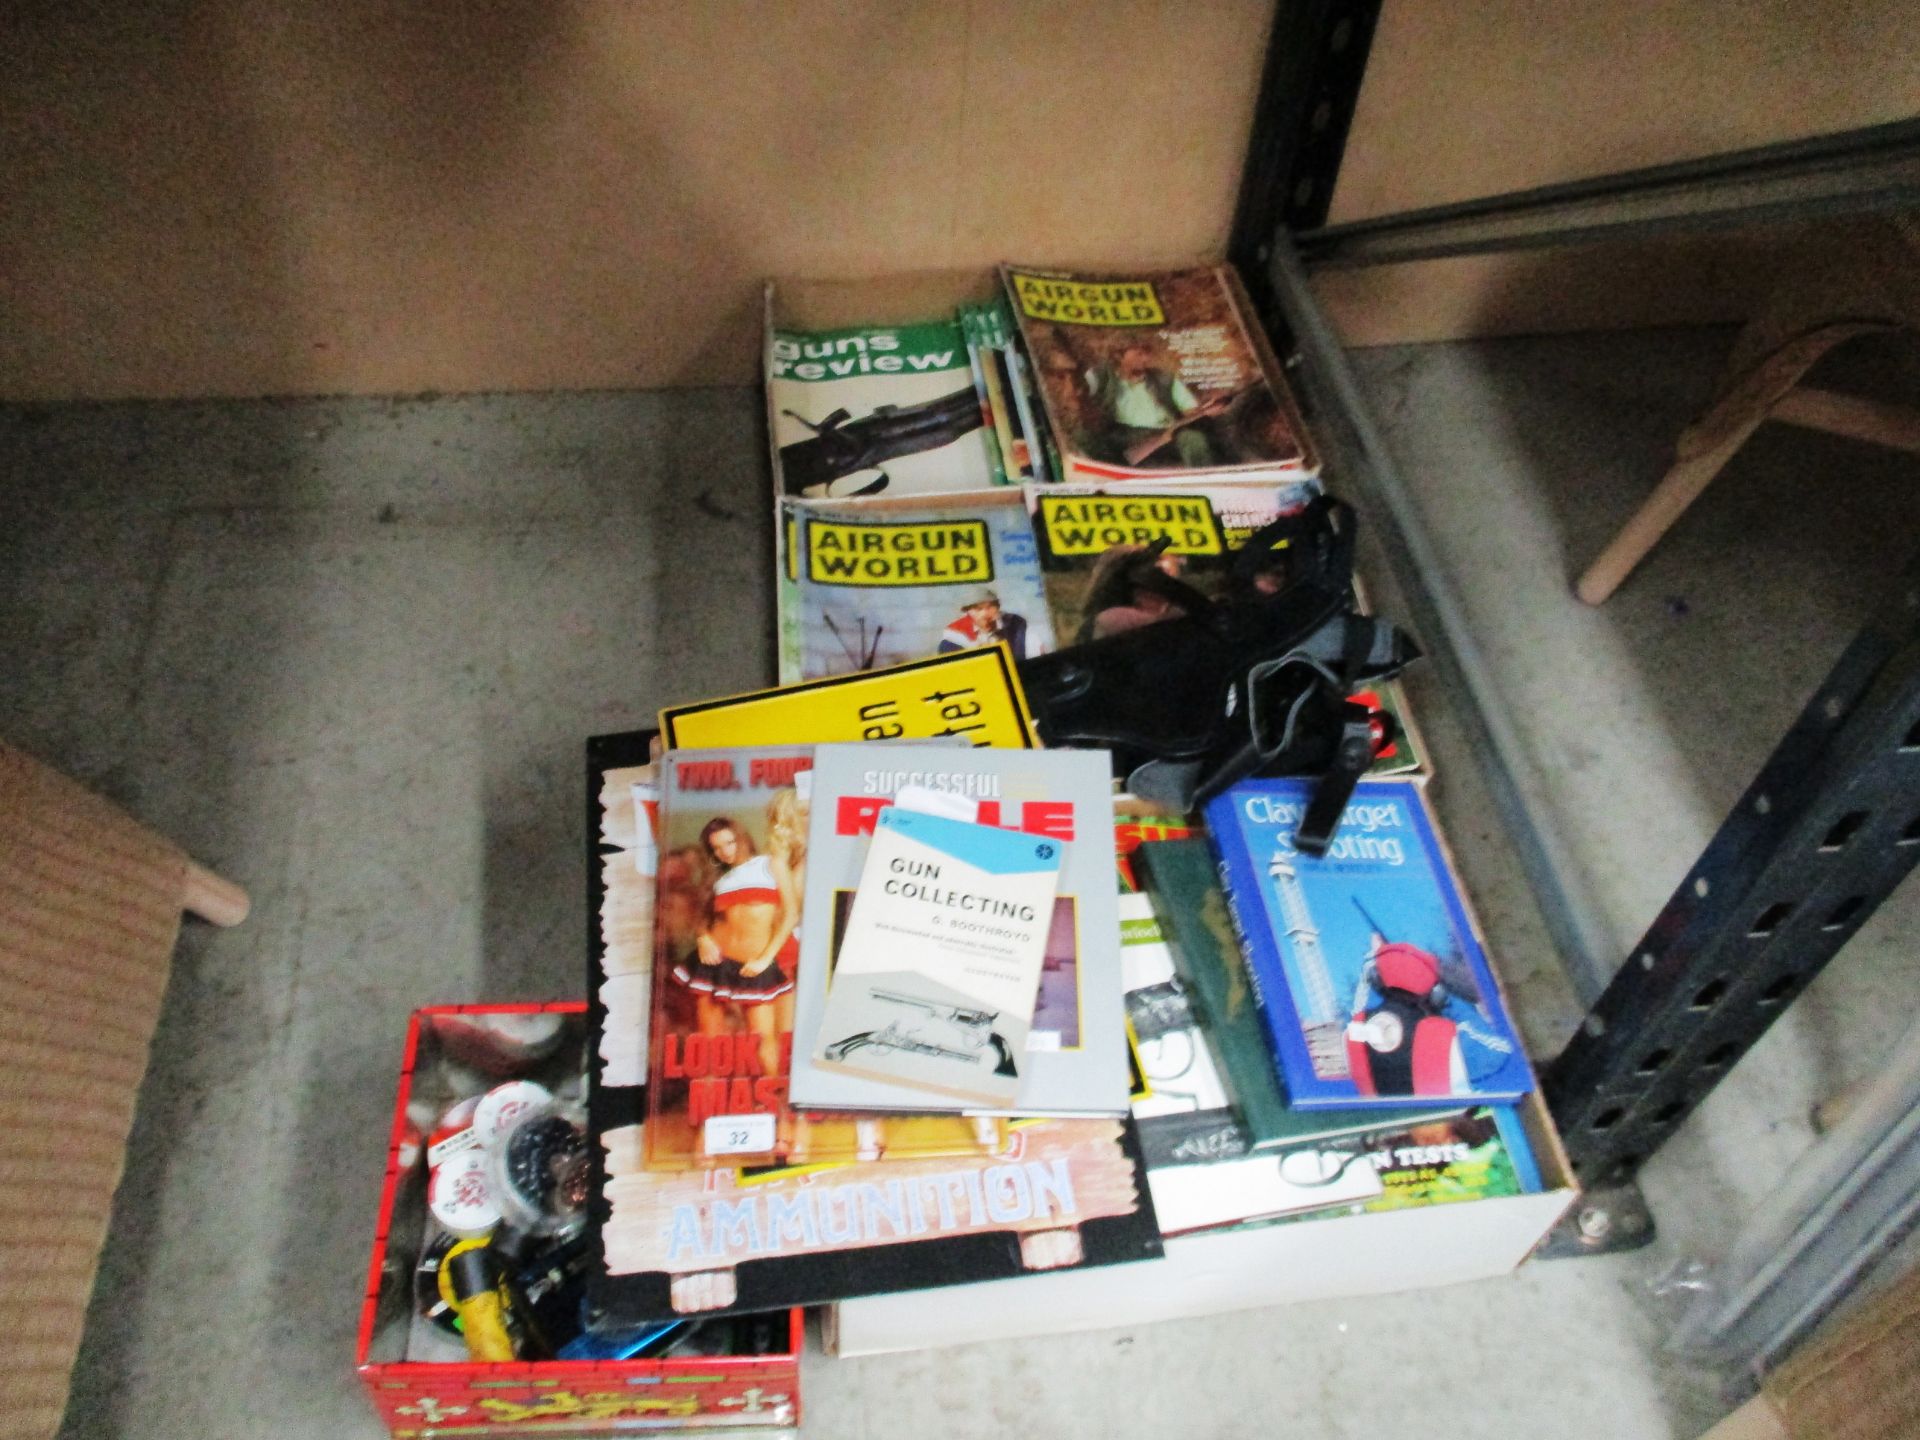 3 boxes of Airgun World and Guns review magazines and a pistol holster,